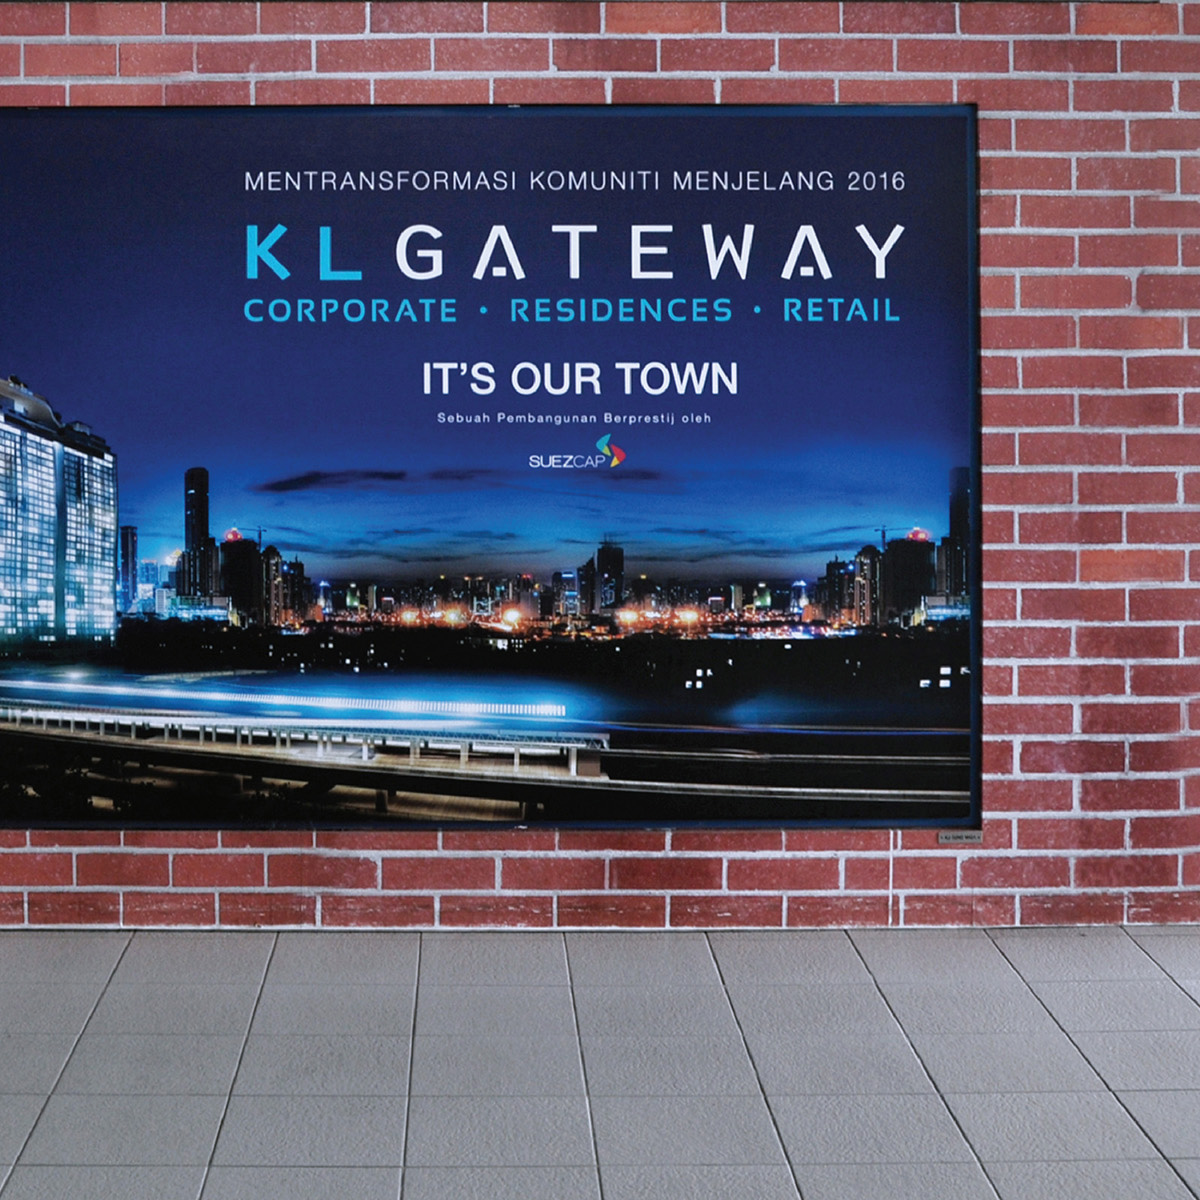 KL Gateway brand advertisement design in the train station display board showing new development facade at night with tagline